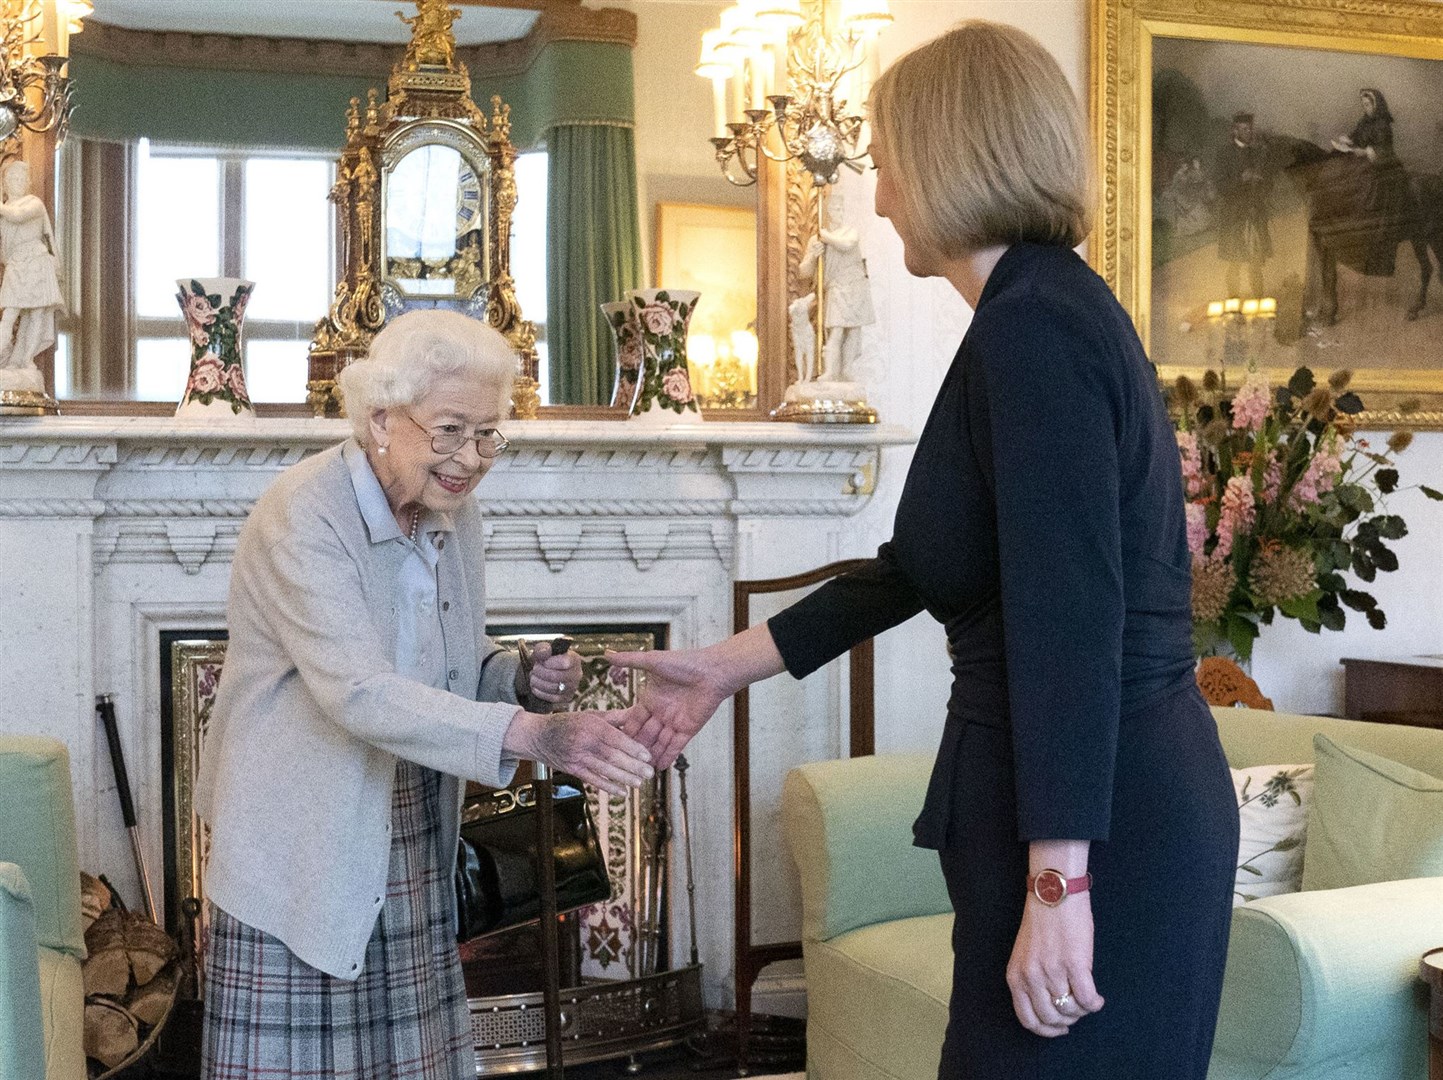 On September 6, the Queen welcomed then-newly-elected Conservative Party leader Liz Truss to Balmoral to invite her to become Prime Minister. This was to be the Queen’s final public act (Jane Barlow/PA)